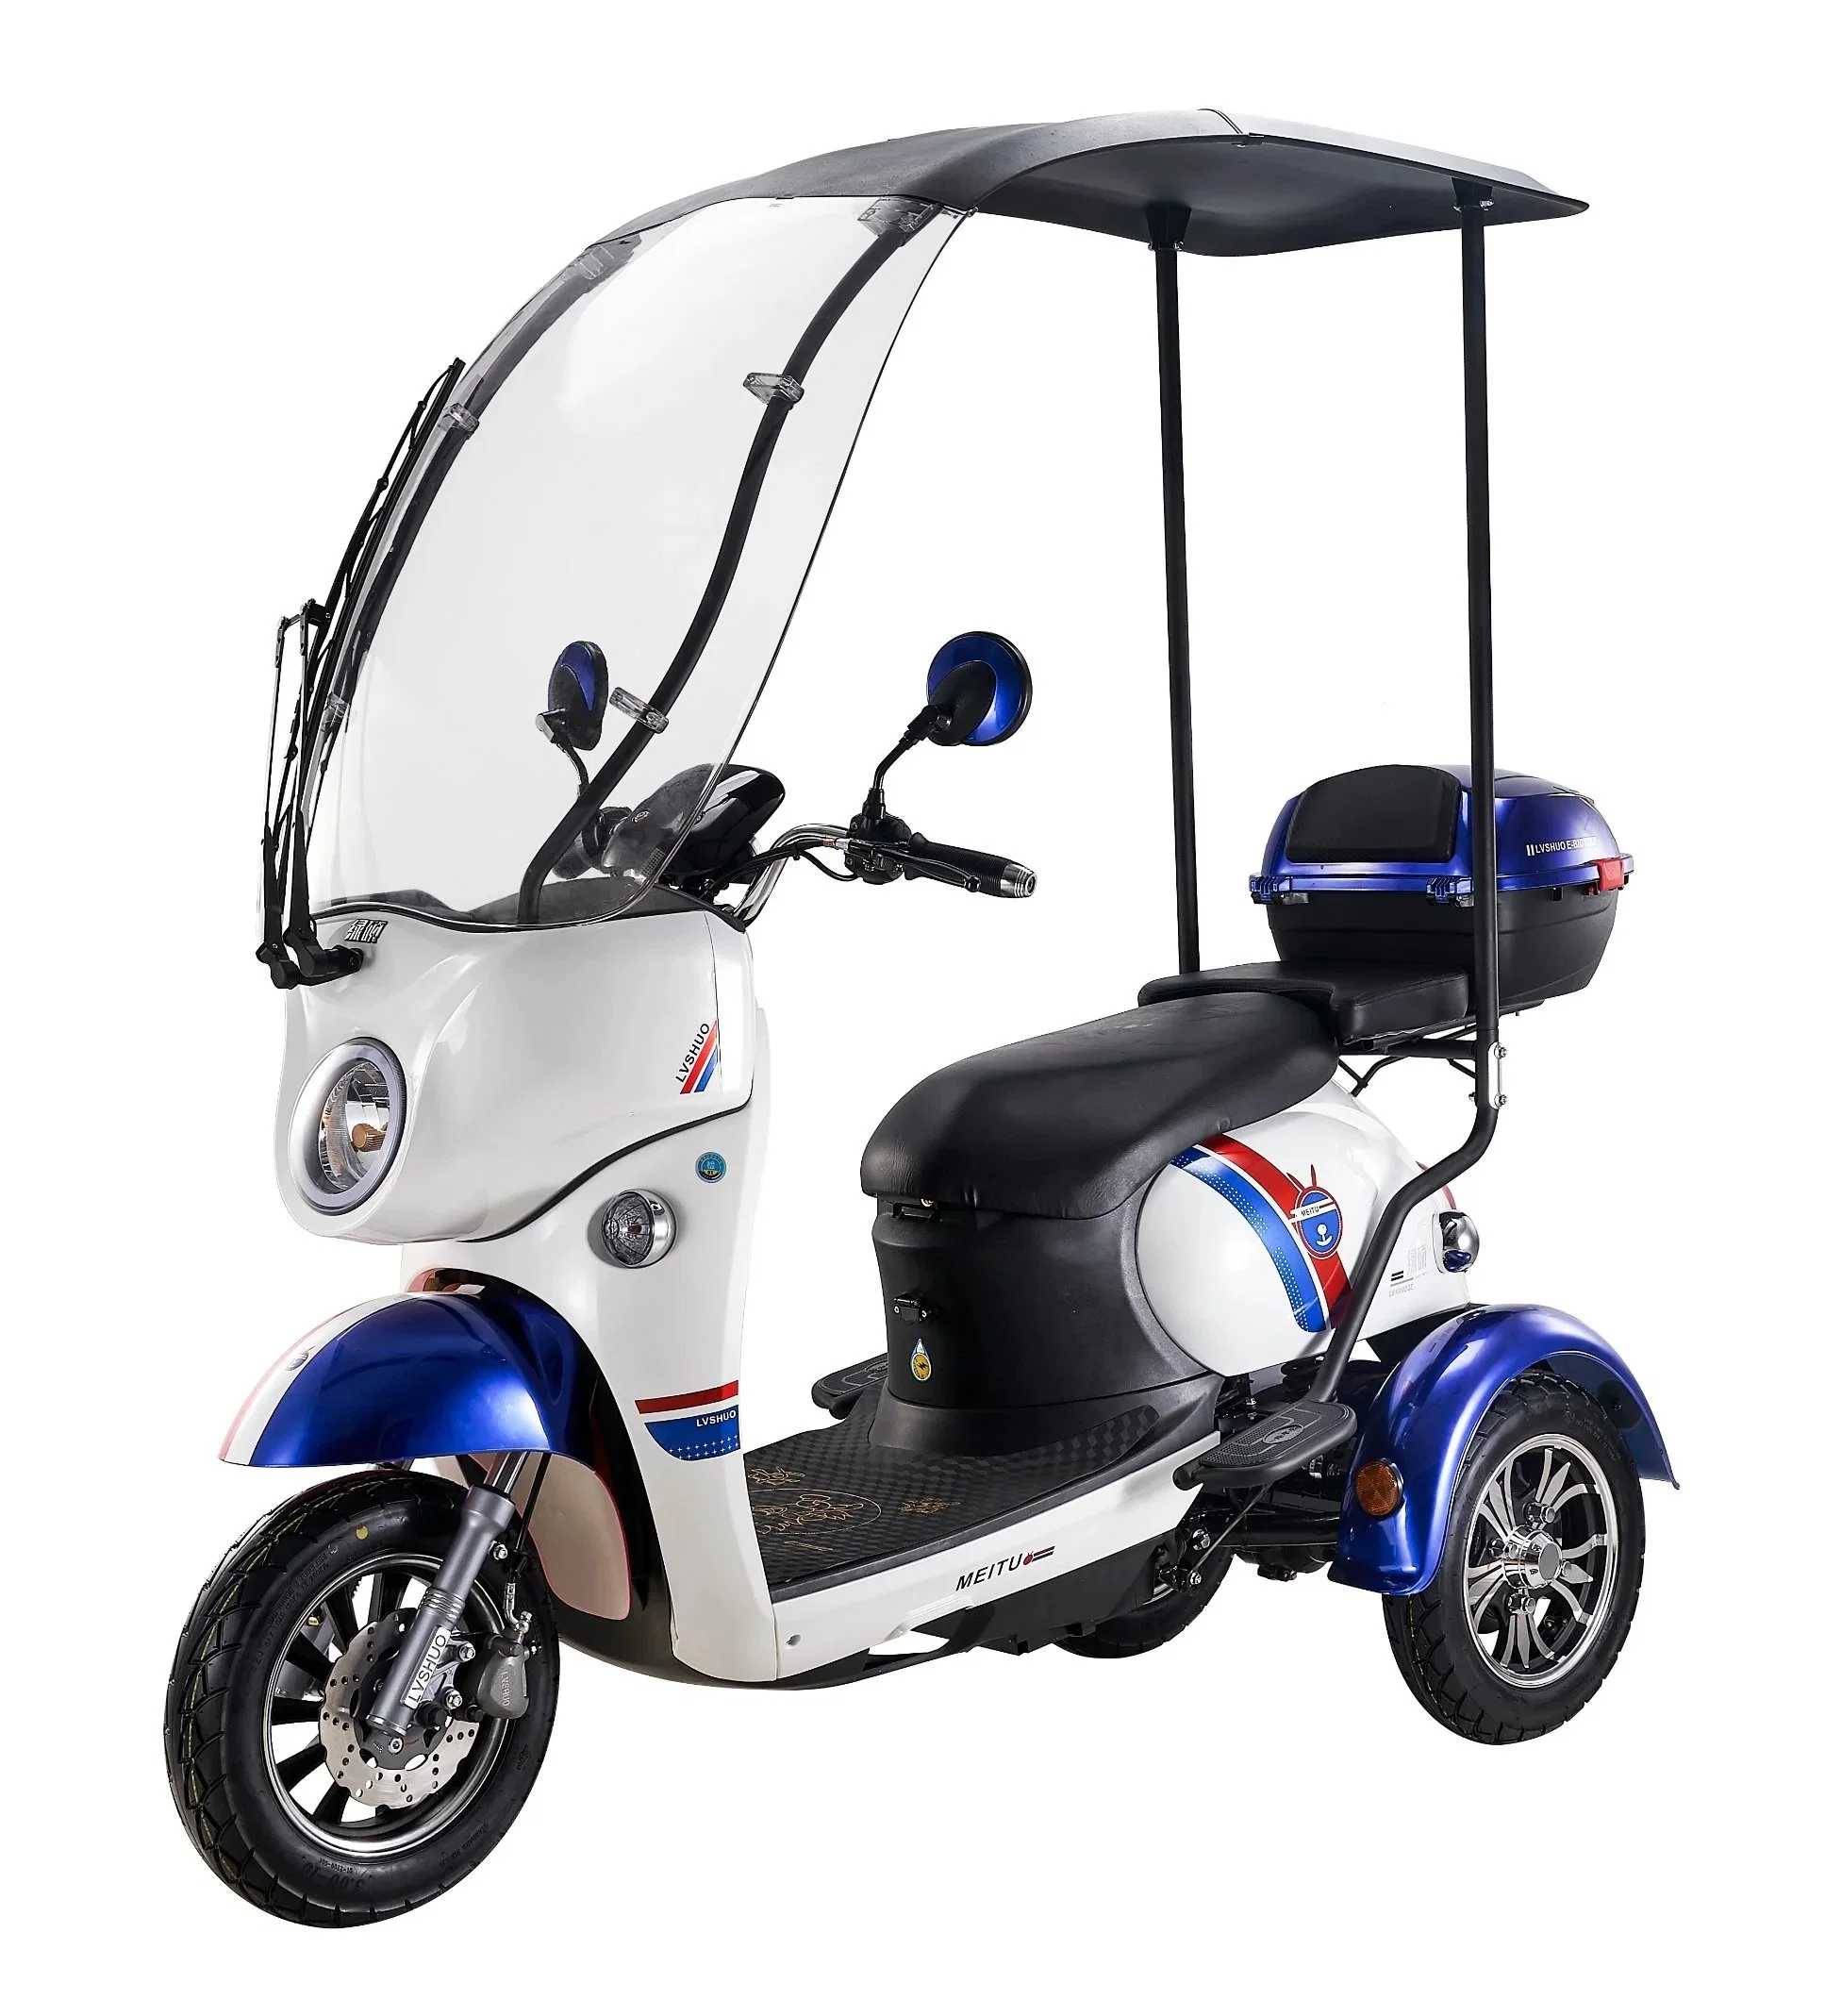 Differiential Motor CE for Adult Passenger and Cargo Bike People Carrier EEC Tricycle 500W 2000W Enclosed 4 Stand up 3 Three Wheel Electric Trike